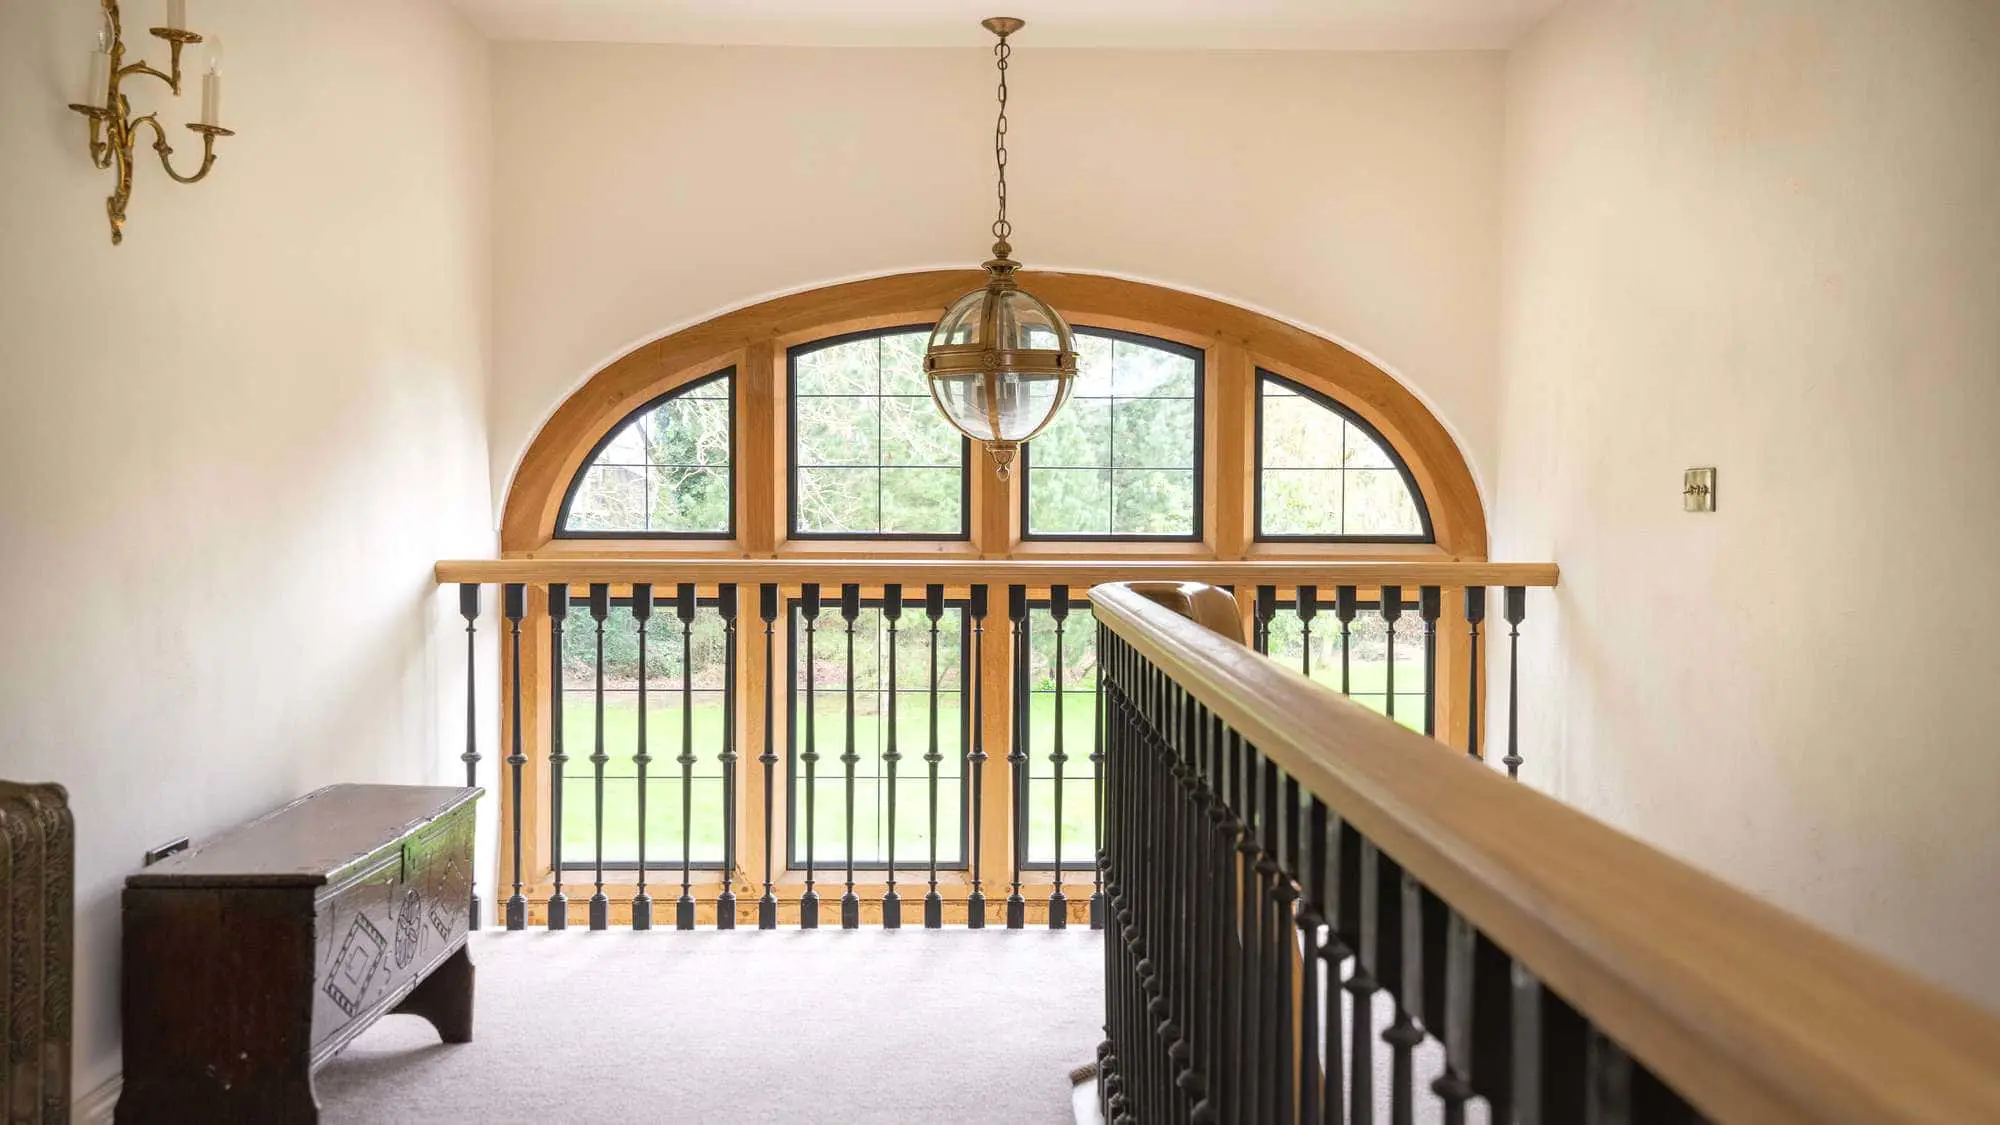 View of the arched timber frame window internally from the first floor.